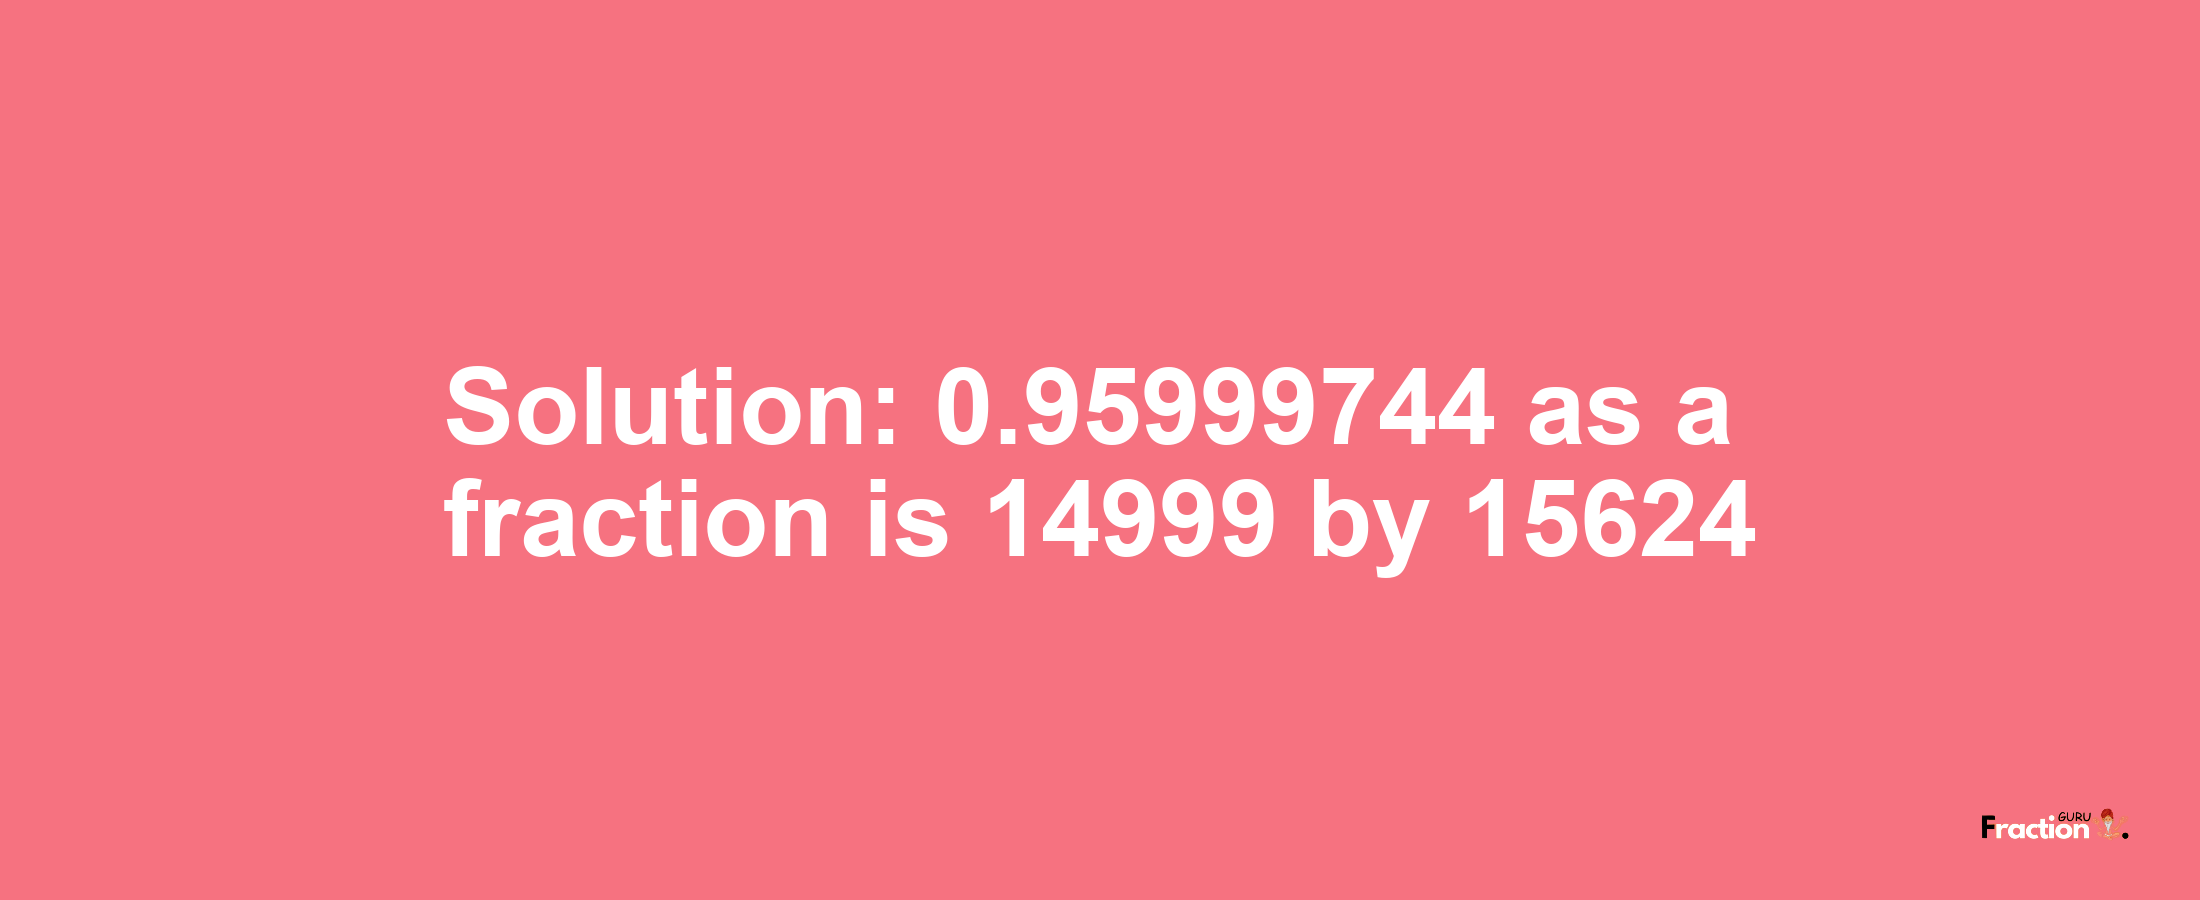 Solution:0.95999744 as a fraction is 14999/15624